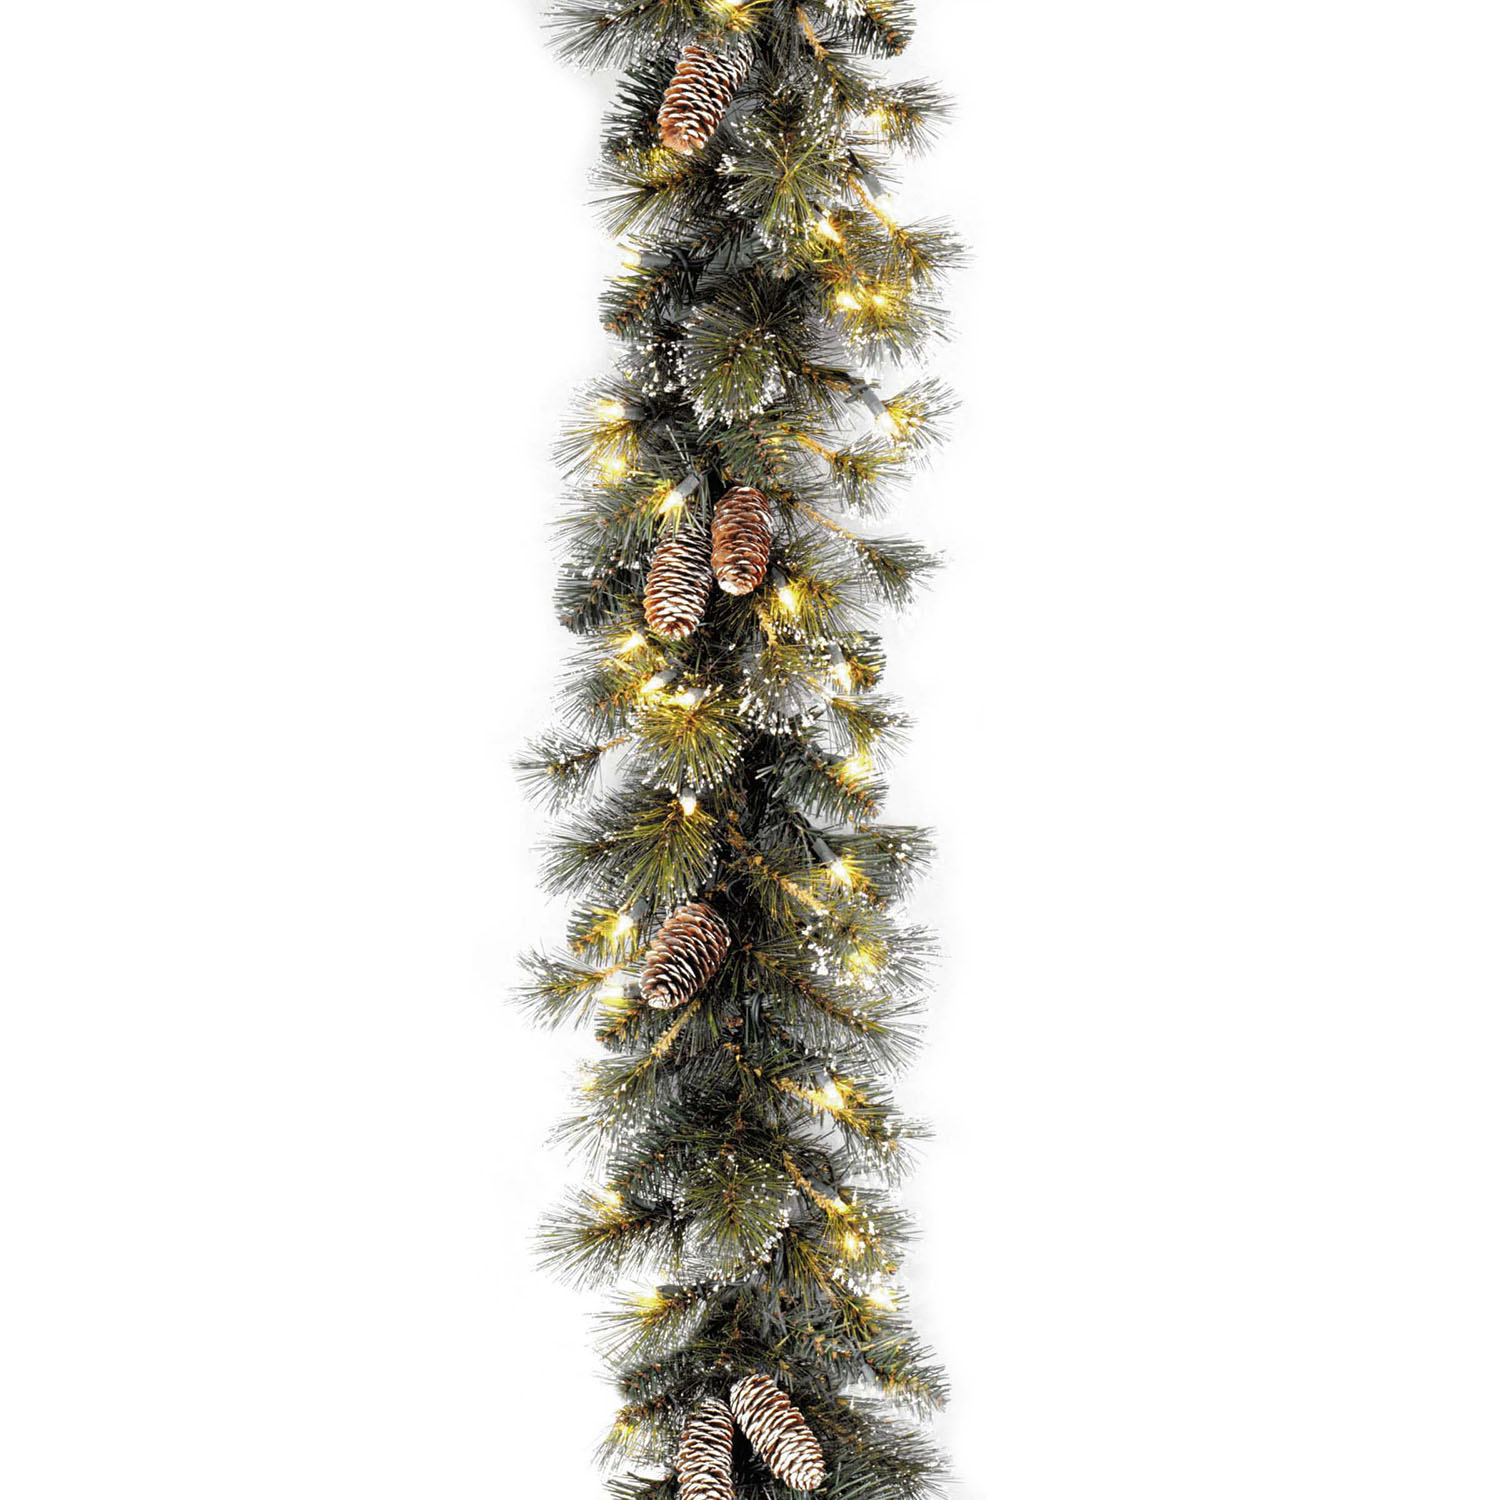 9 Foot X 10 Inch Glitter Pine Garland: Cones/snowflakes/lights